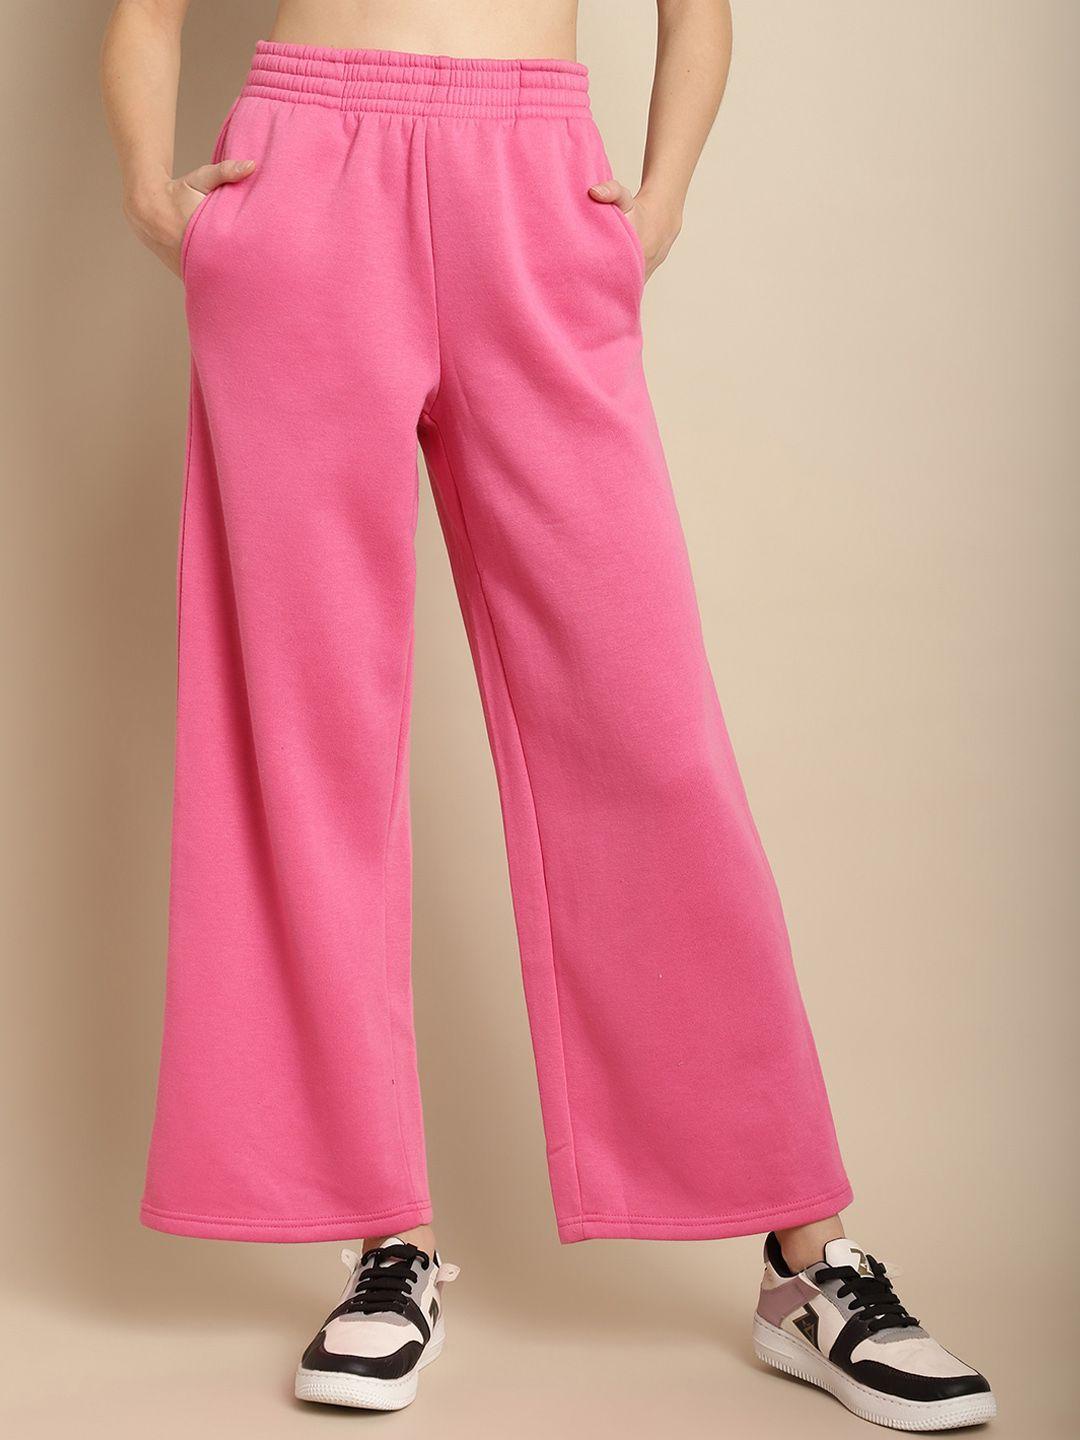 nobarr-women-mid-rise-parallel-trousers